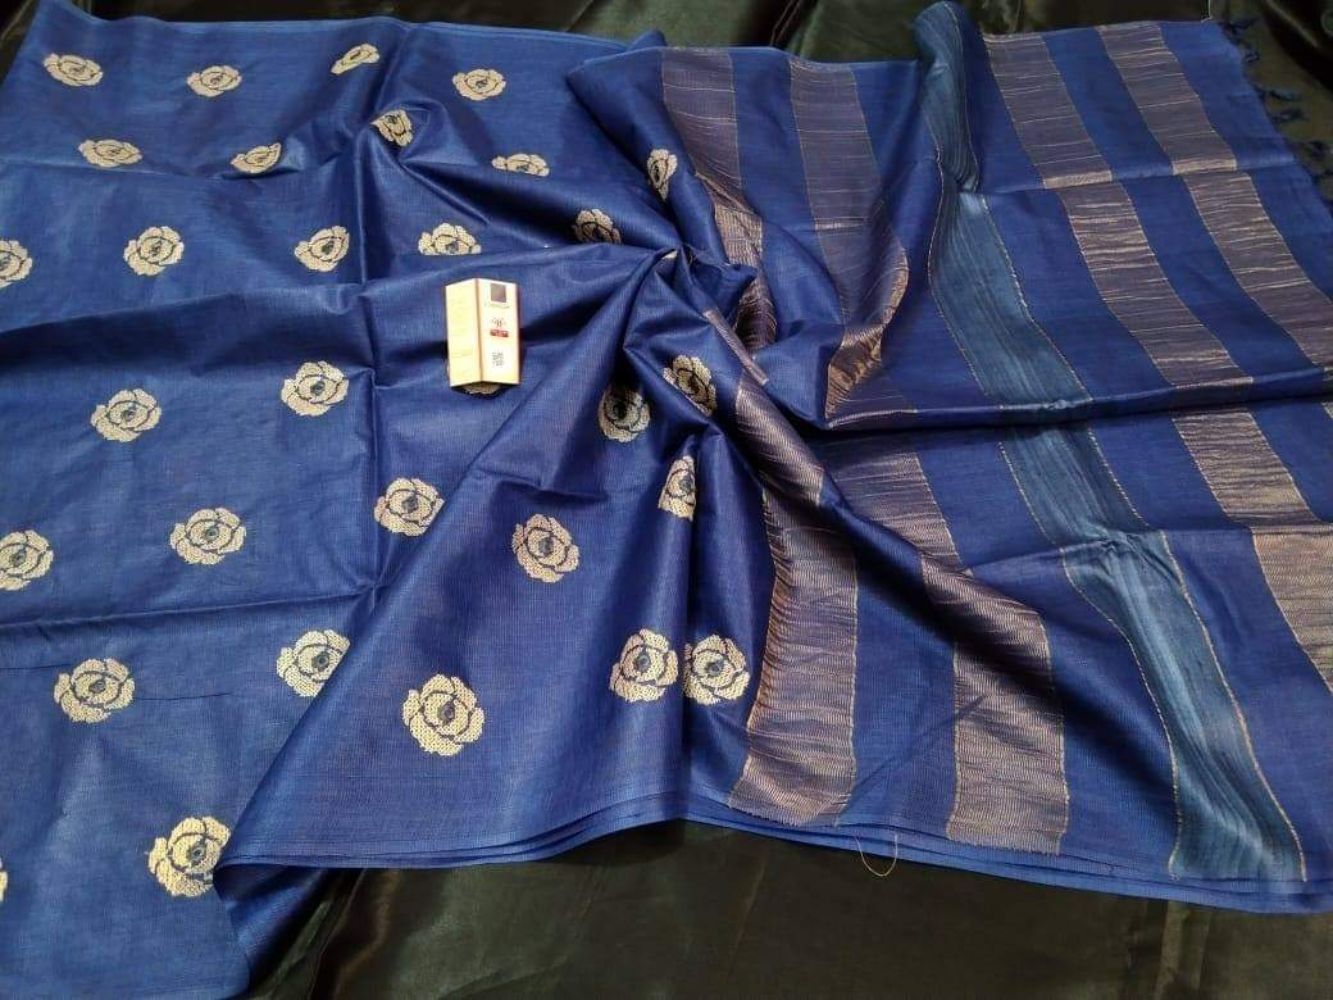 Silkmark Certified Eri Silk Embroidered Saree with Blouse